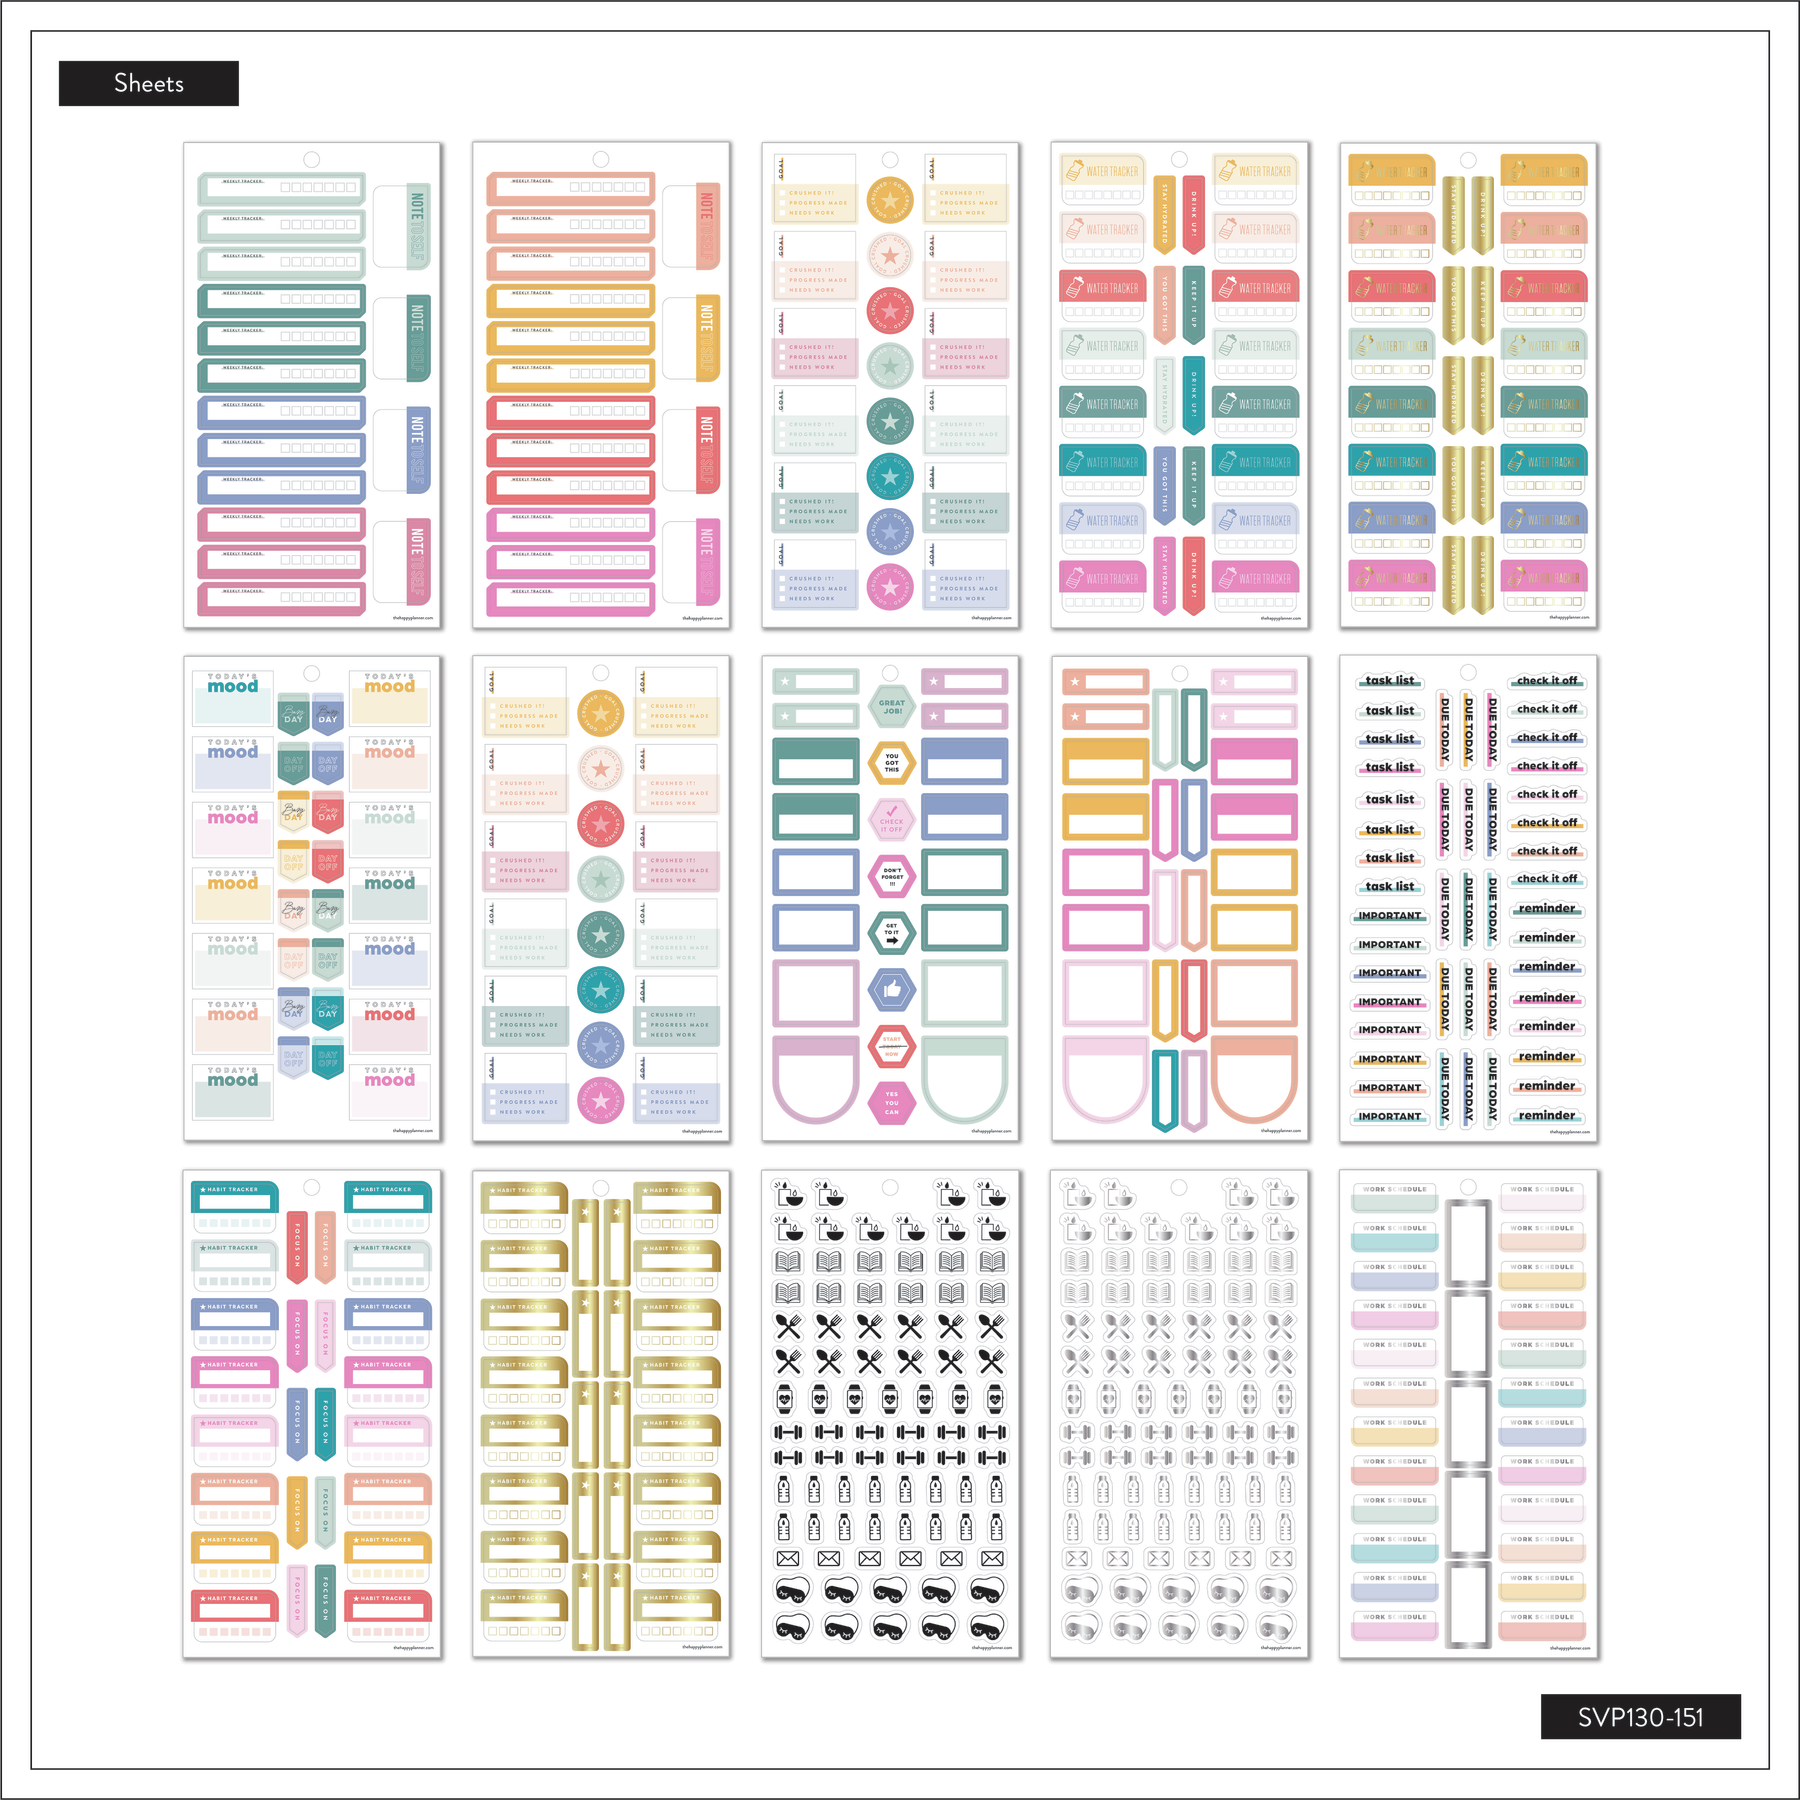 795pc Sewing 30 Sheet Happy Planner Sticker Pack